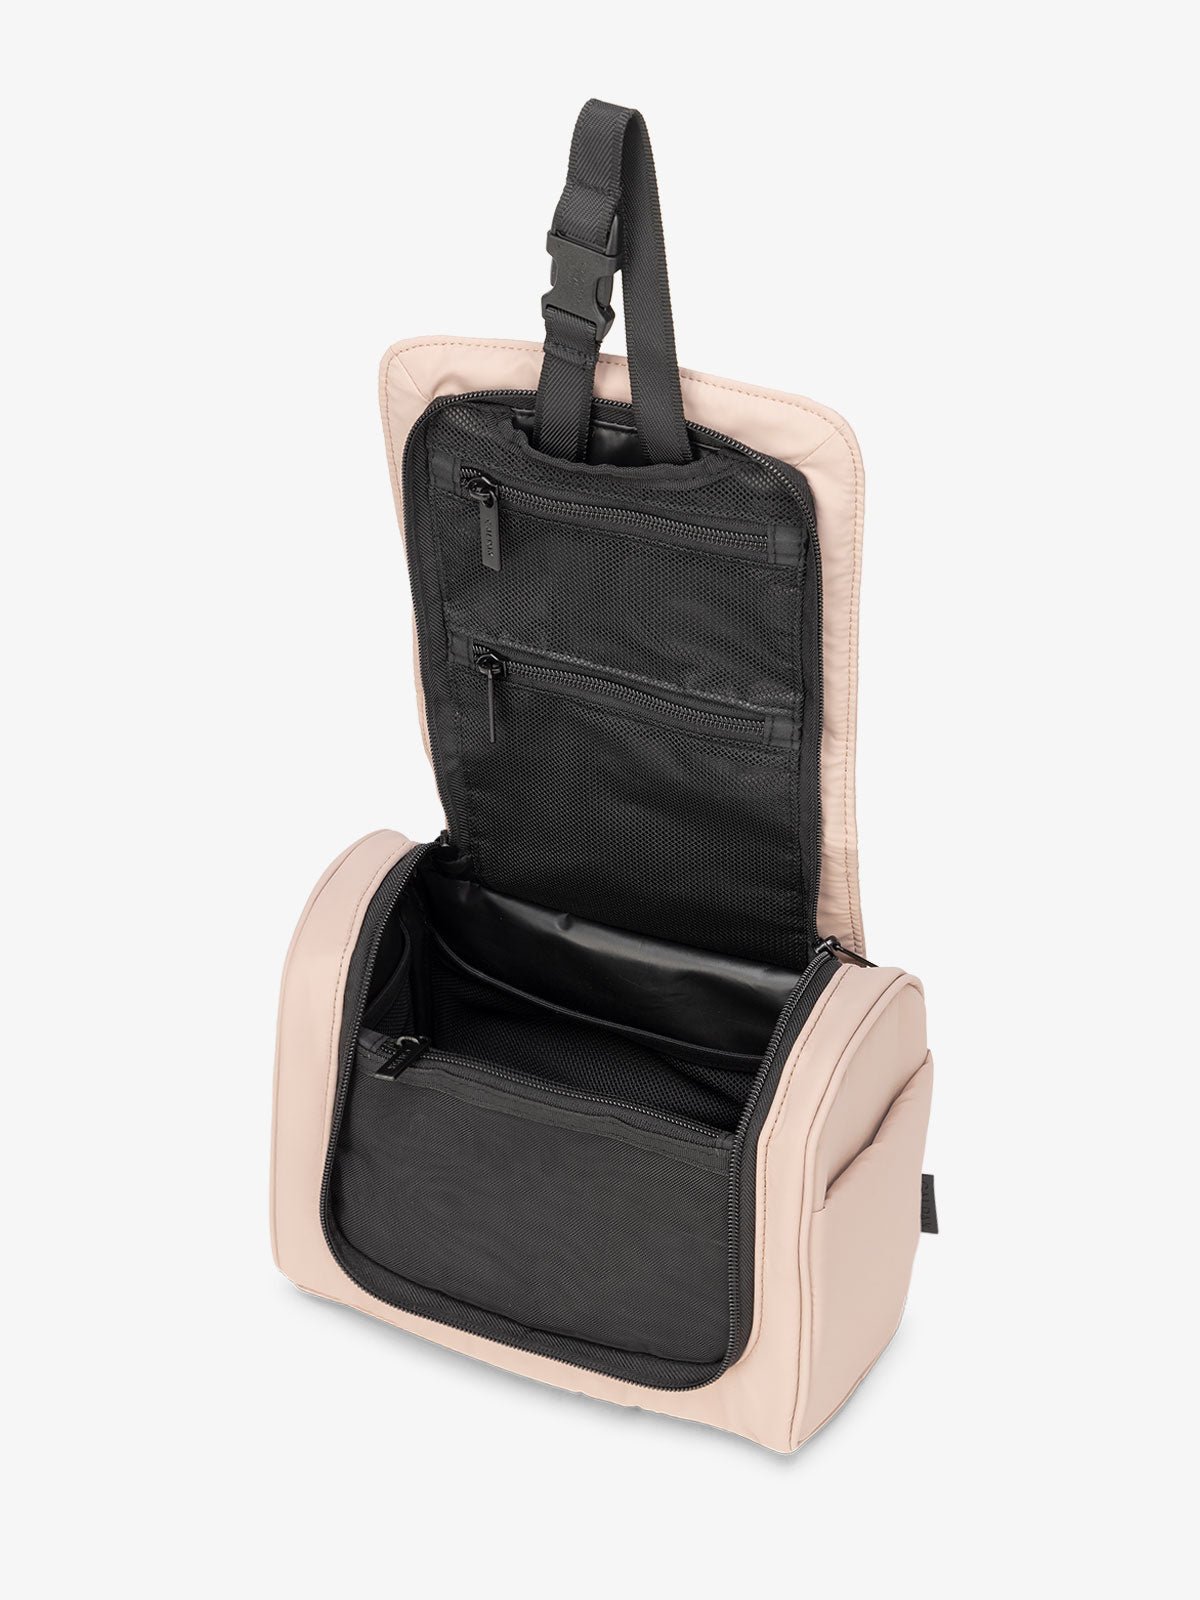 Luka Hanging Toiletry Bag with multiple interior pockets and retractable hanging strap in rose quartz pink